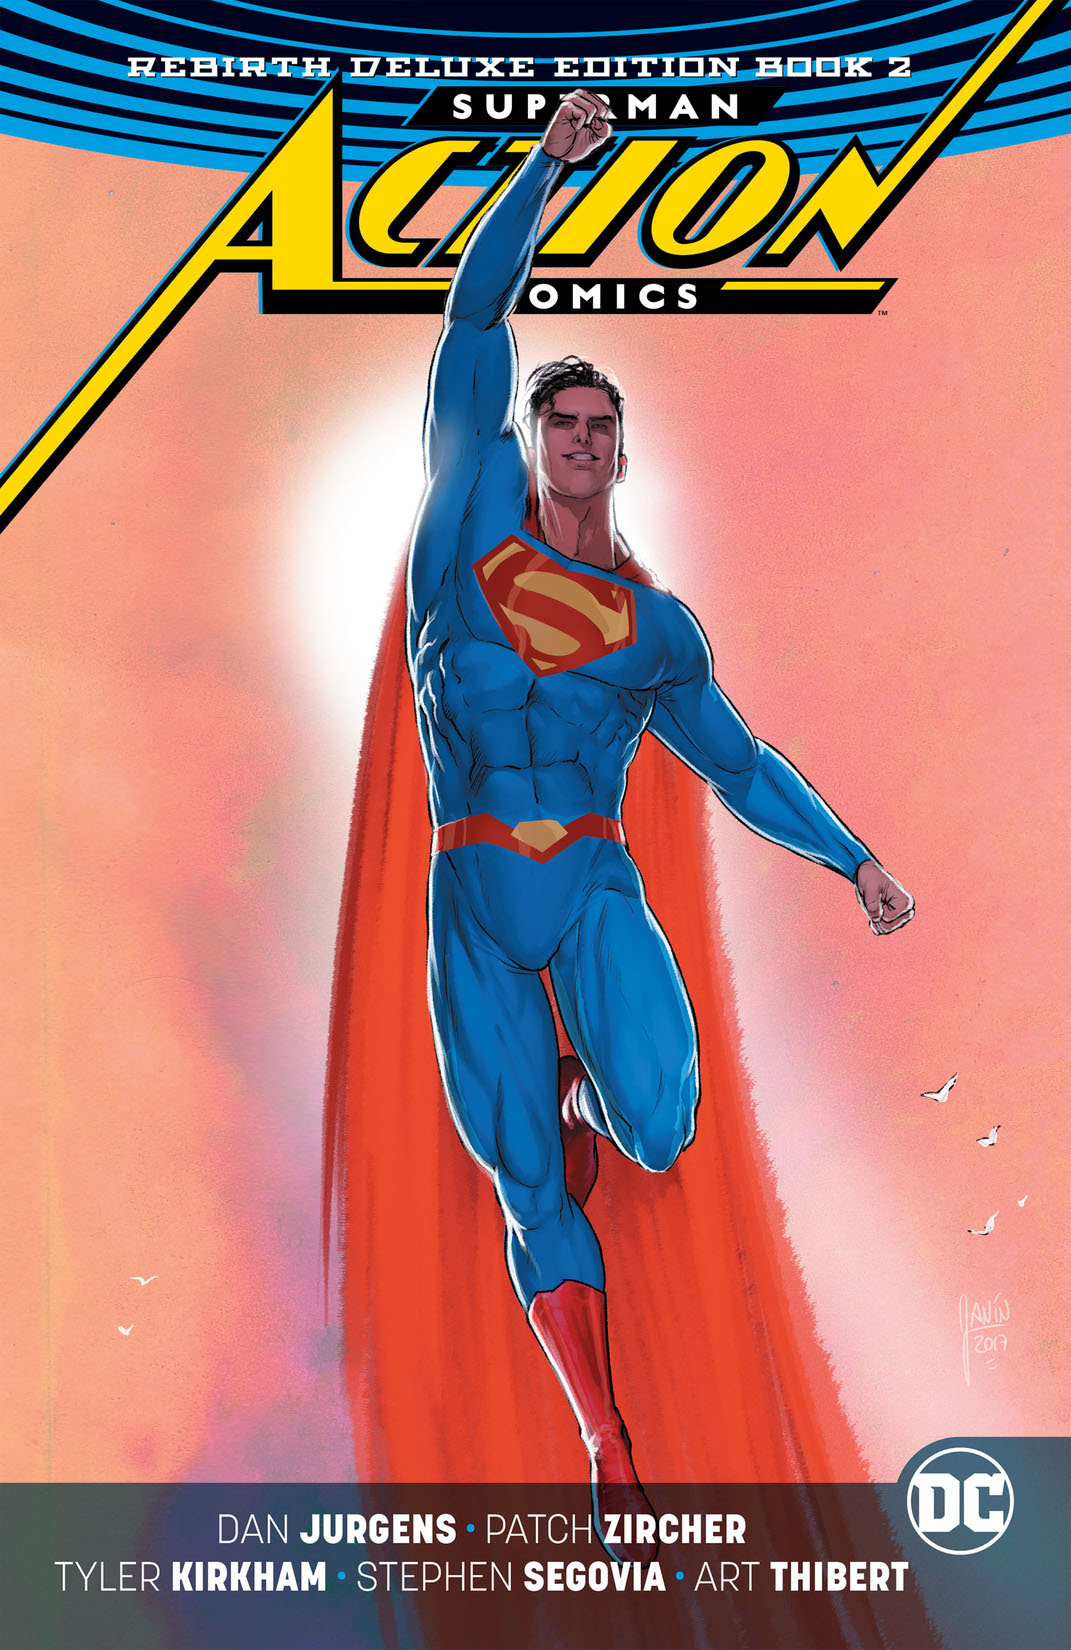 Superman - Action Comics: The Rebirth Deluxe Edition Book 2 preview images